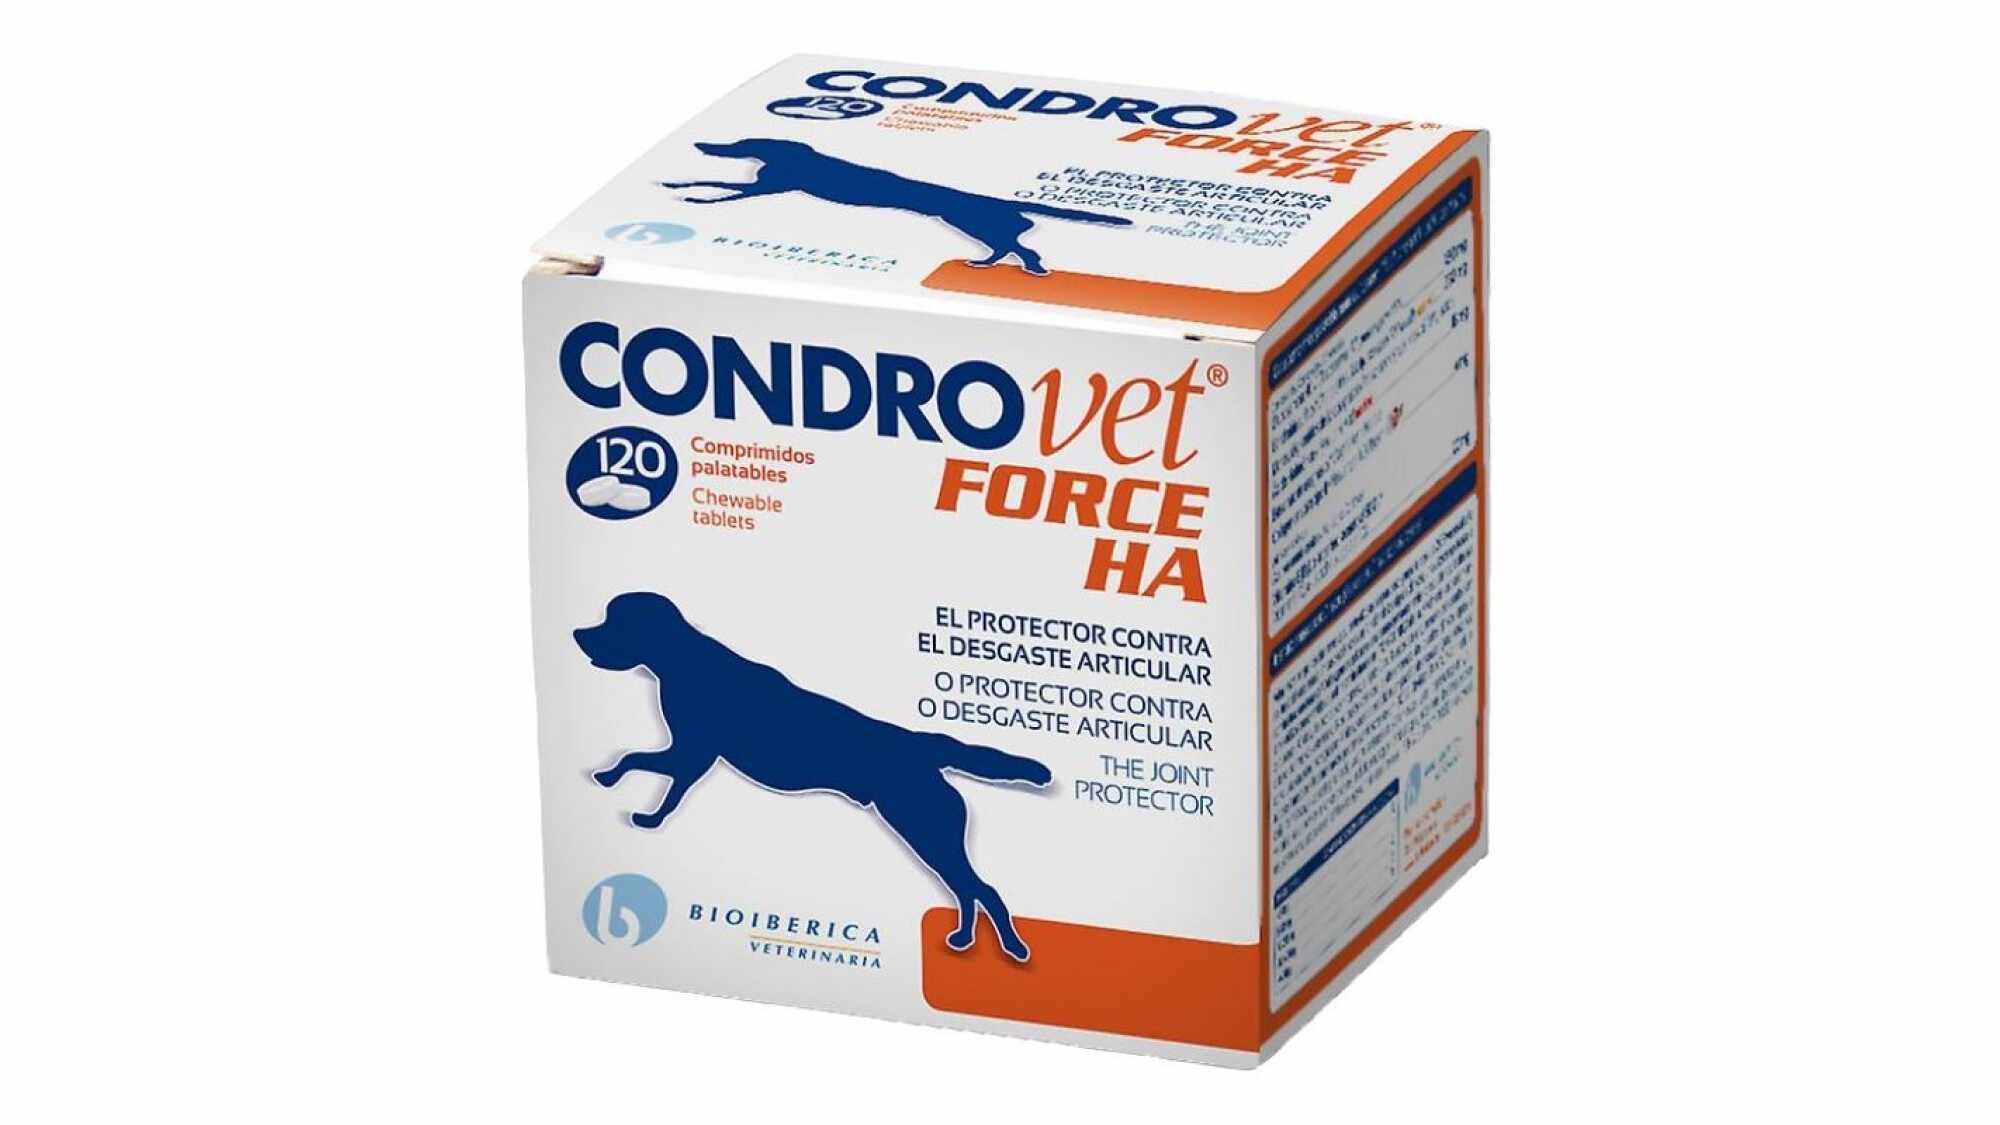 Condrovet Force HA For Dog, 120 Tablete